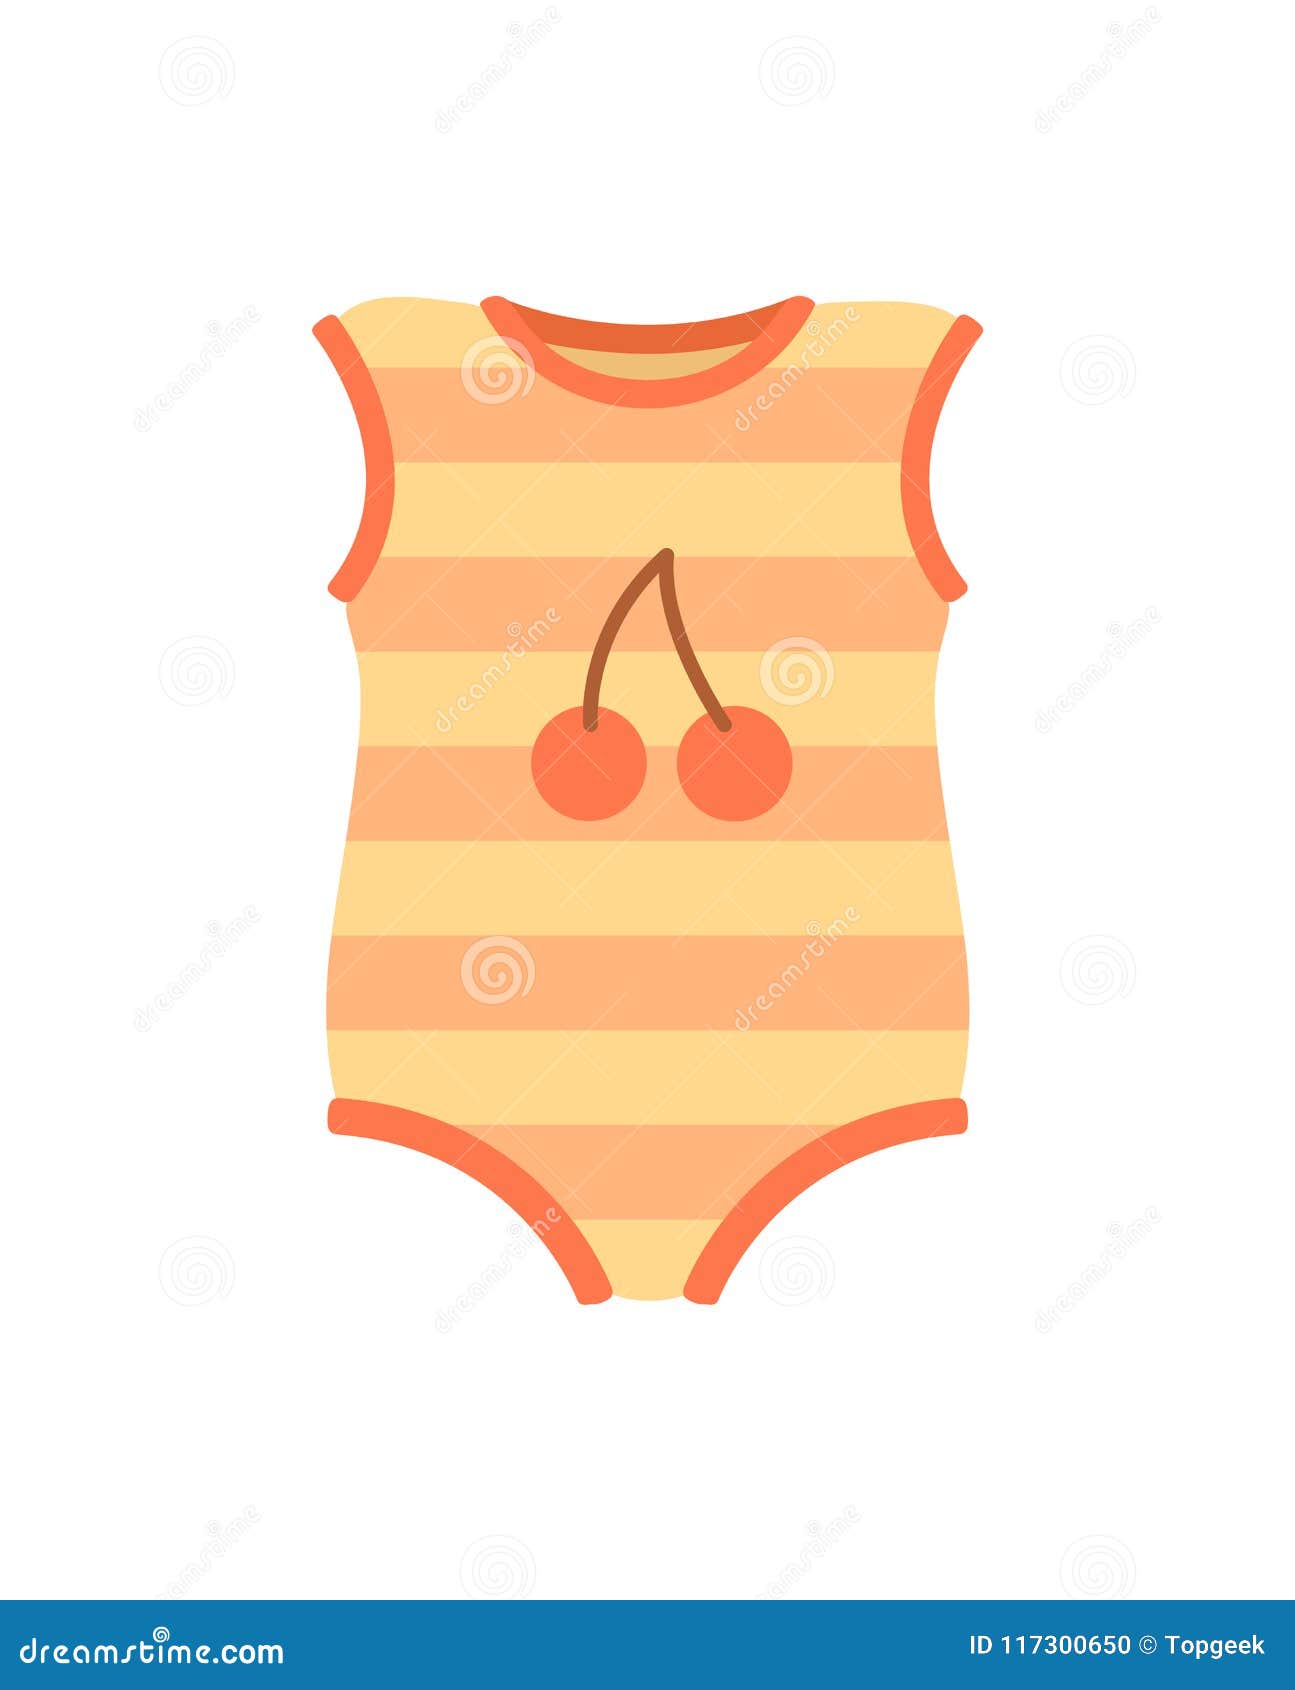 Download Baby Clothes Romper Poster Vector Illustration Stock ...